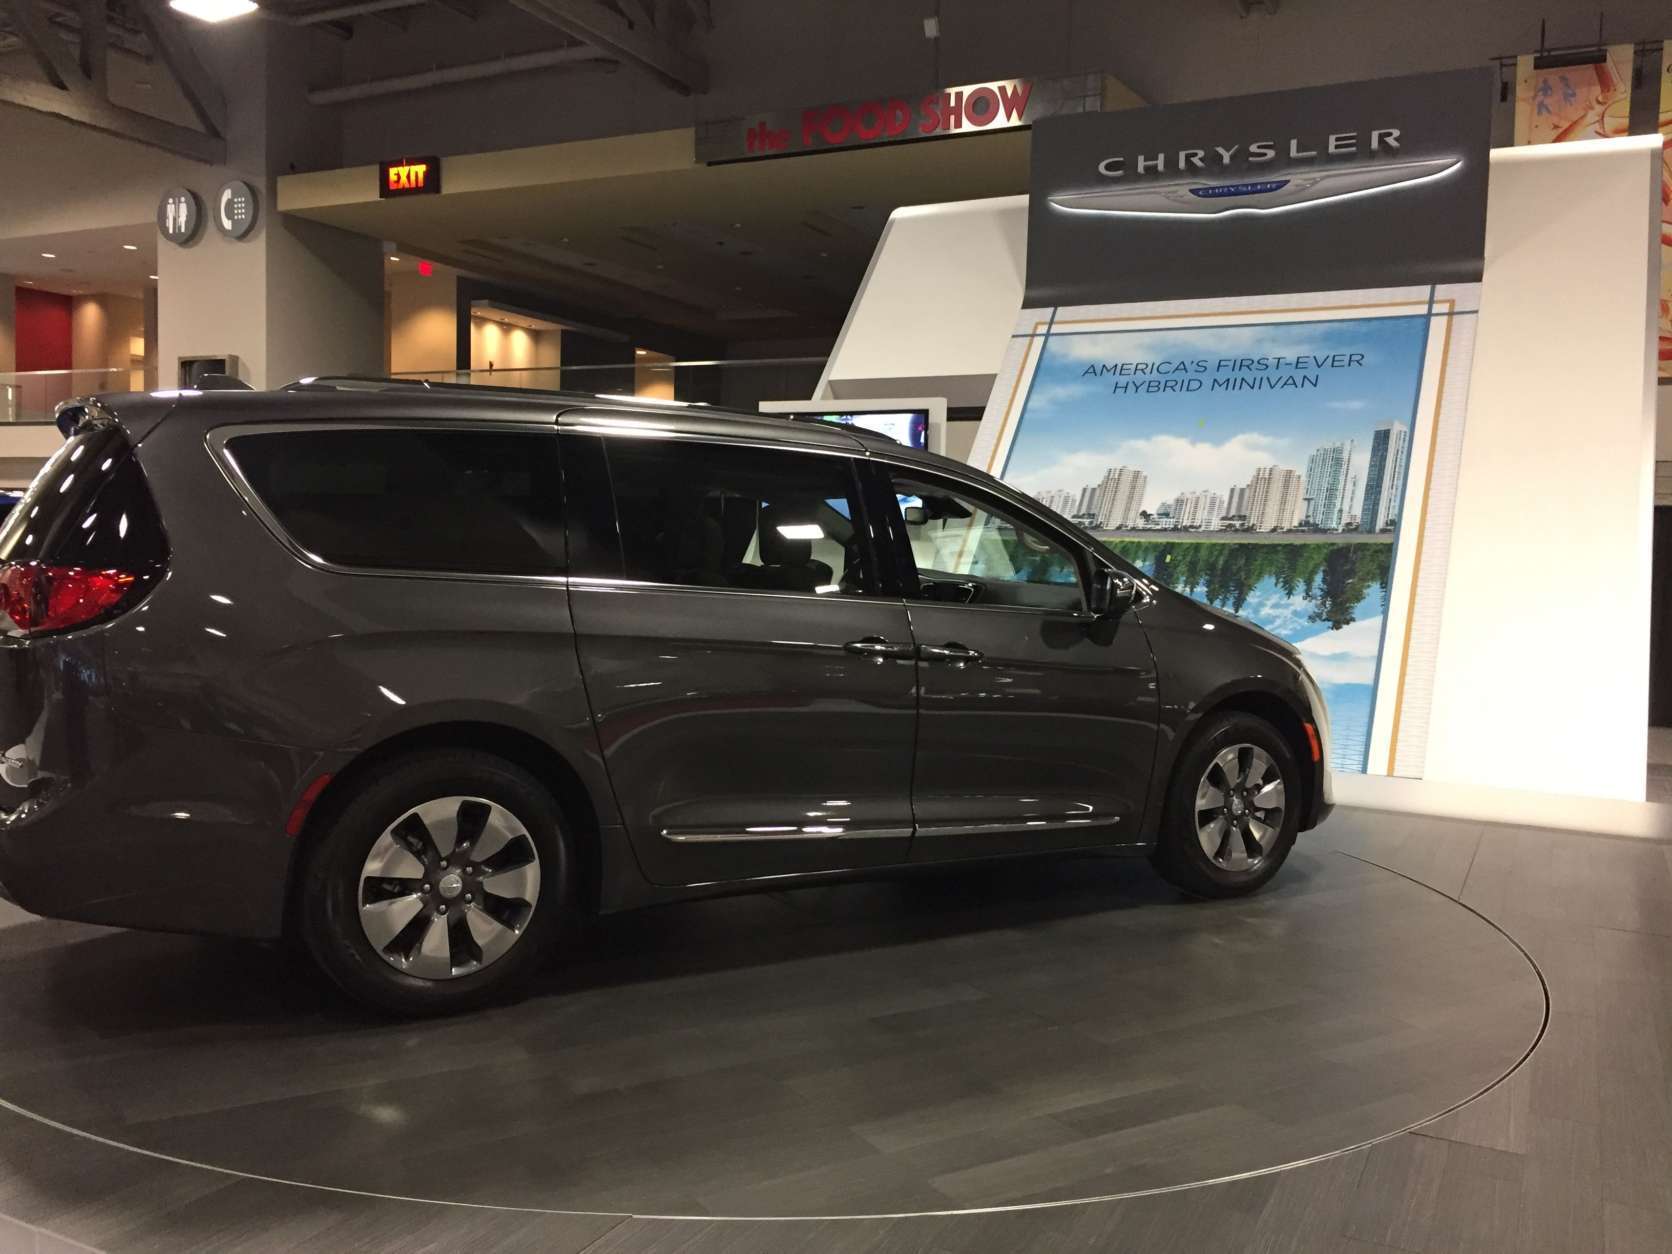 The first American hybrid minivan, the Chrysler Town and Country. Pictured at the 2018 Washington Auto Show. (WTOP/John Domen)